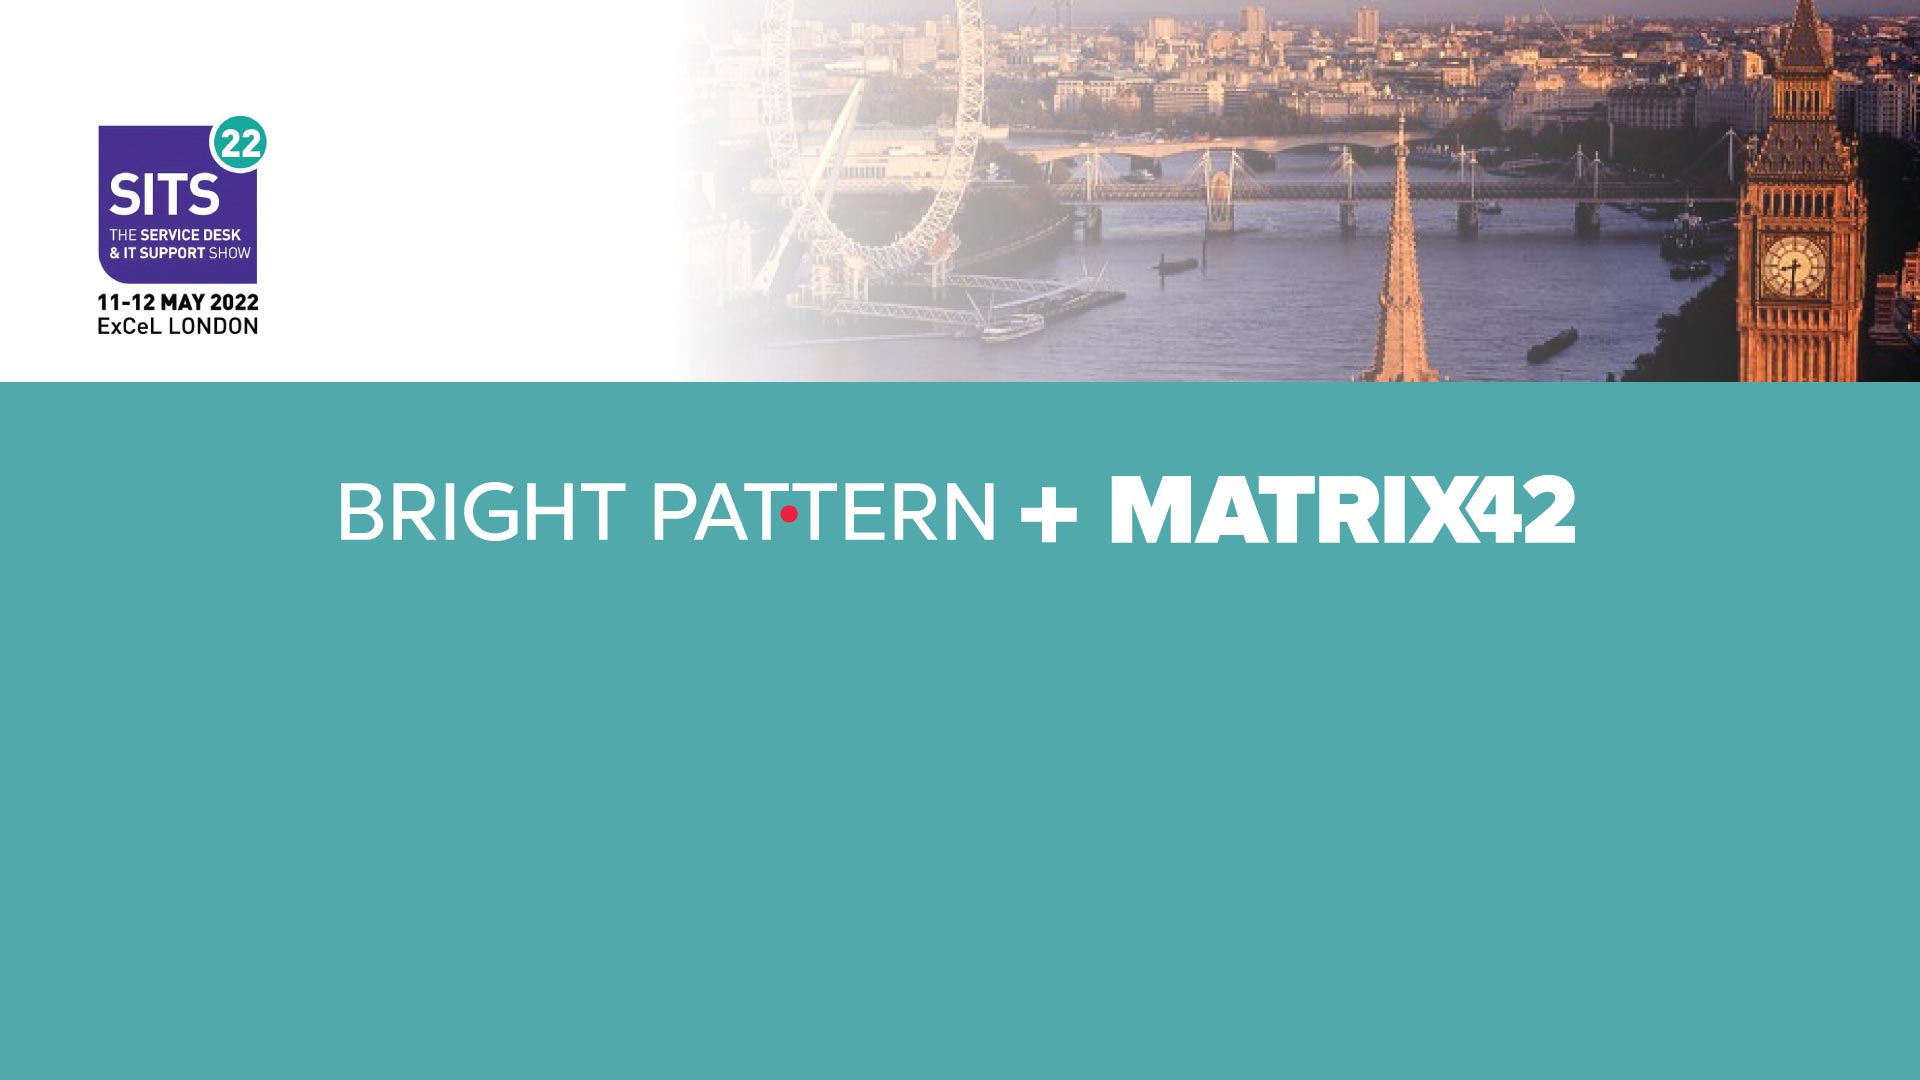 Bright Pattern and Matrix42 Partner to Bring AI-Powered Omnichannel Communication Interaction Platform for Service Management to Matrix42 Users